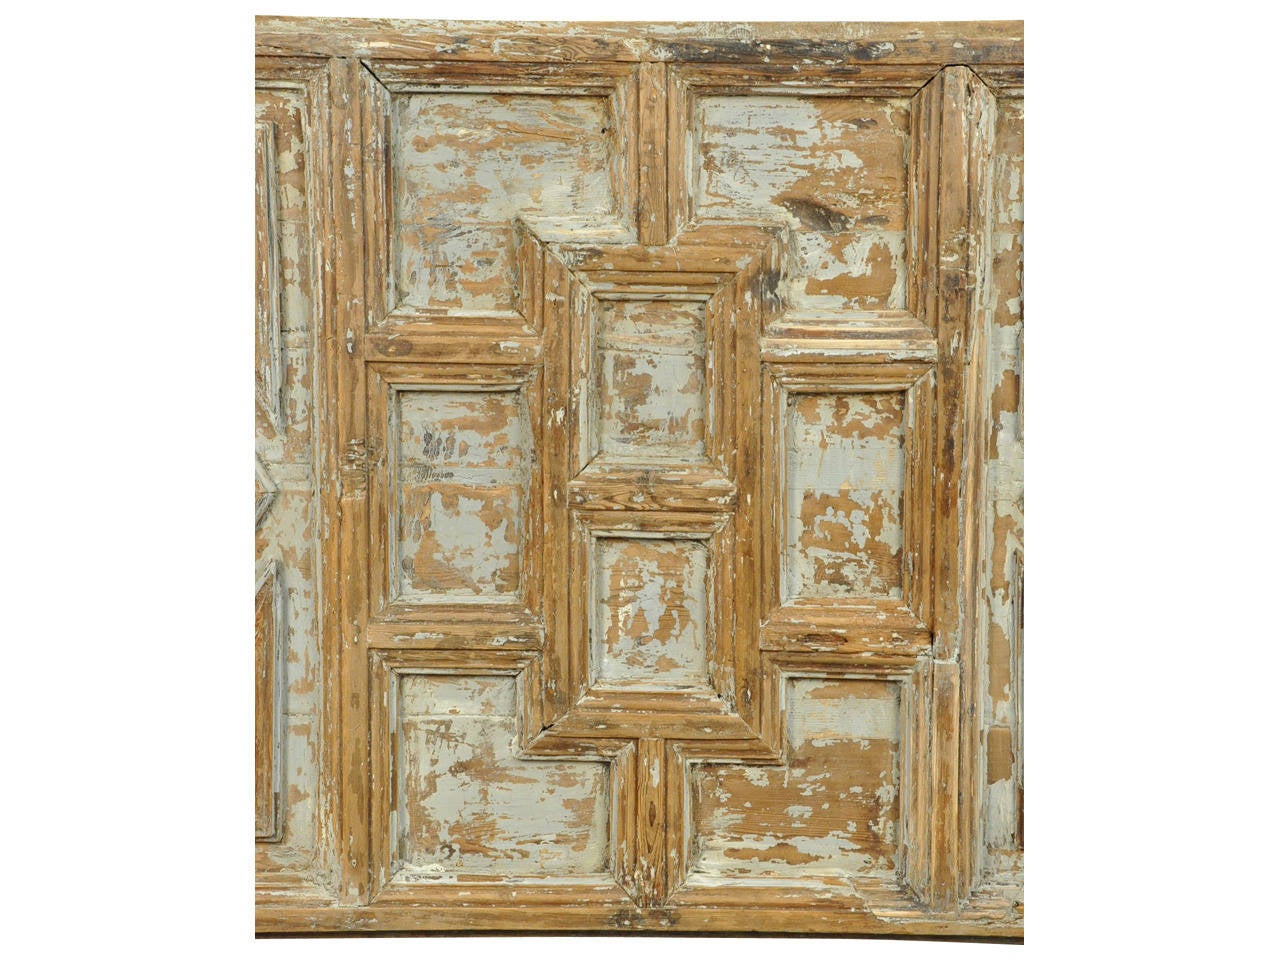 A stunning 17th century door in painted wood from Spain.  This door has very handsome character and substance.  It will serve wonderfully installed as a functioning door, or will be a magnificent wall hanging piece or headboard to a king size bed. 